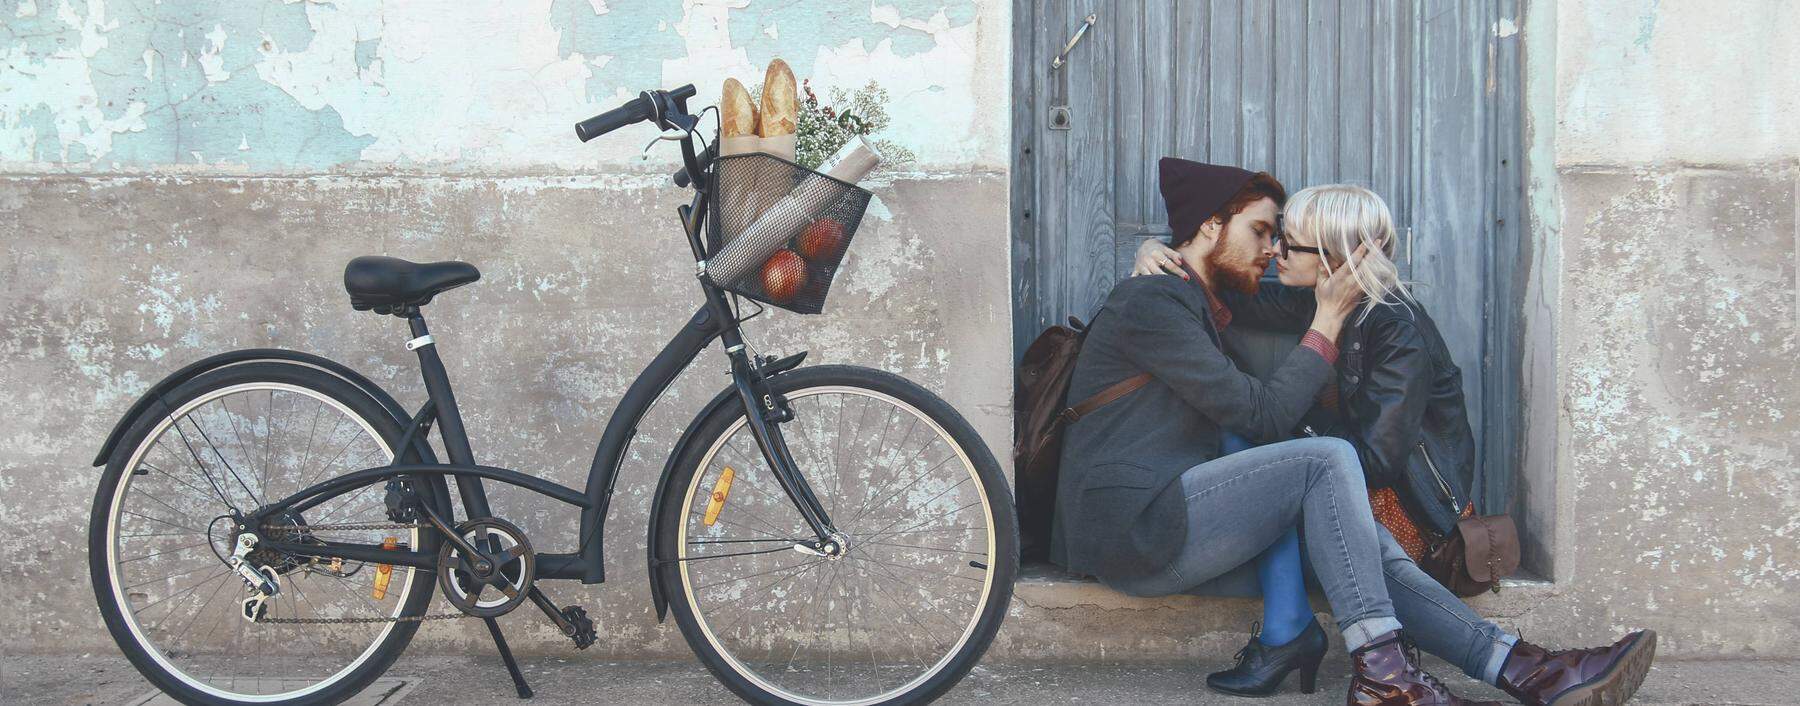 Young couple in love kissing on door step next to a bike model released Symbolfoto PUBLICATIONxINxGERxSUIxAUTxHUNxONLY RTBF00559

Young COUPLE in Love Kissing ON Door Step Next to a Bike Model released Symbolic image PUBLICATIONxINxGERxSUIxAUTxHUNxONLY RTBF00559  